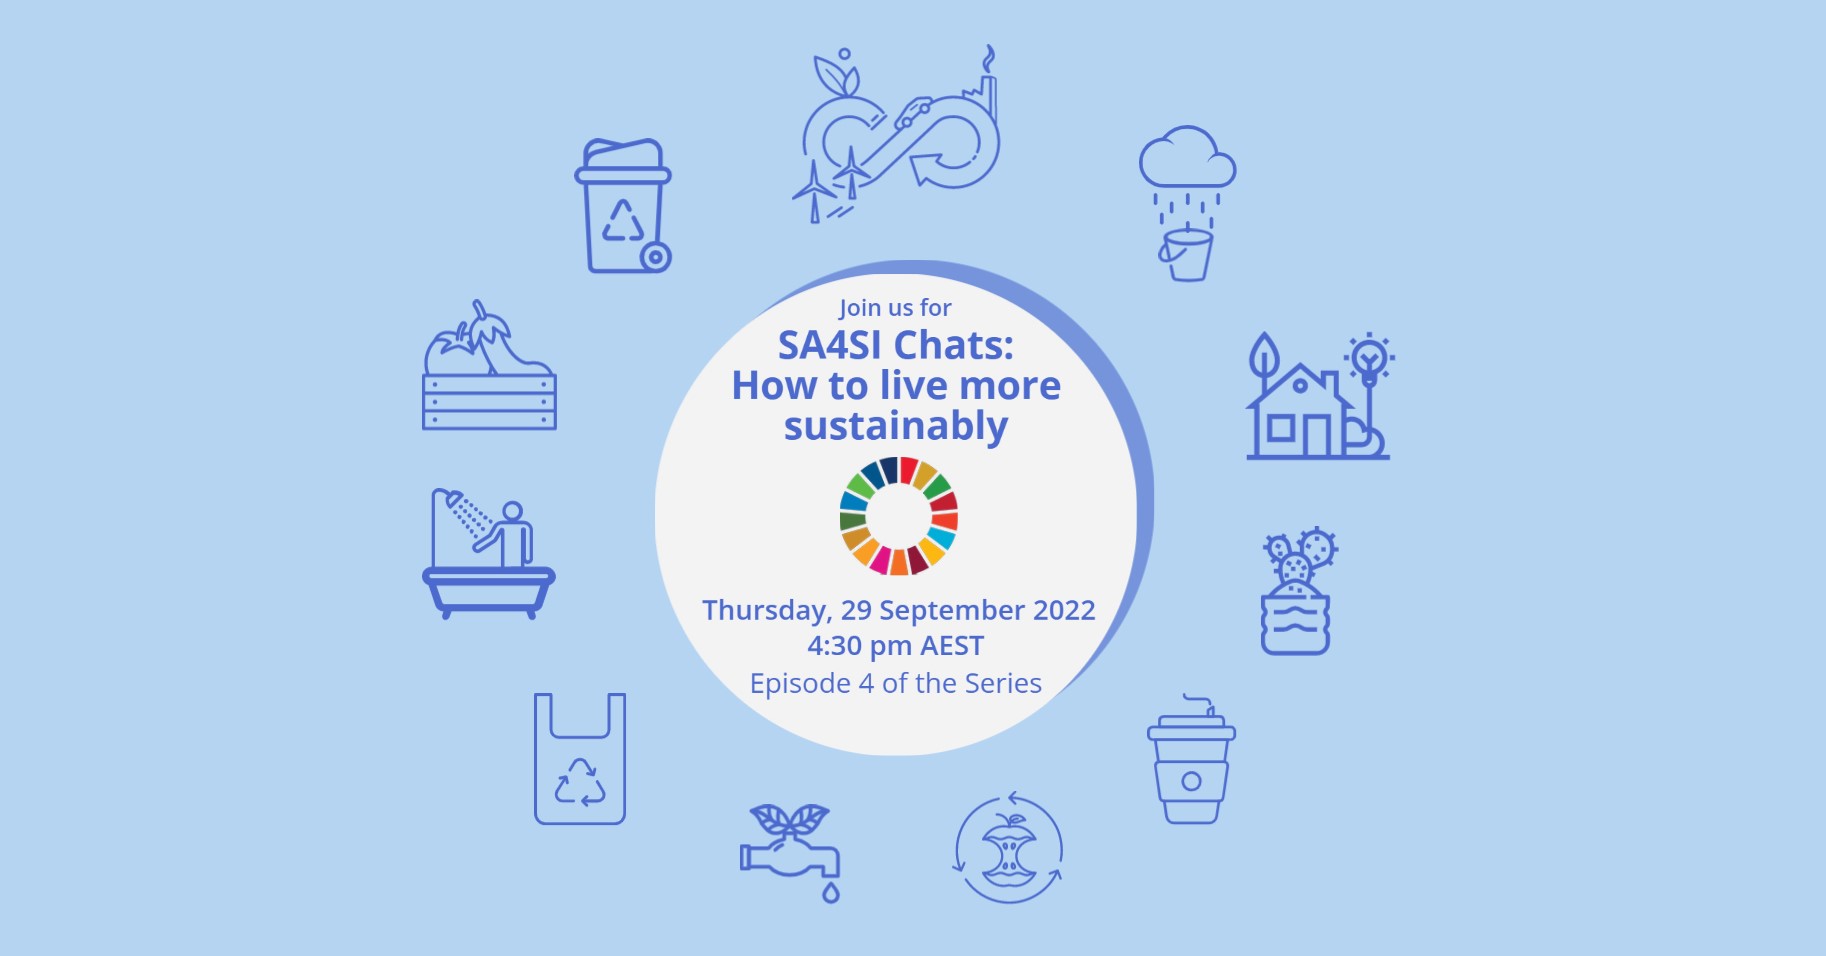 Icons representing sustainability on a blue background with information on the SASS1 Chat 4 on September 29. 